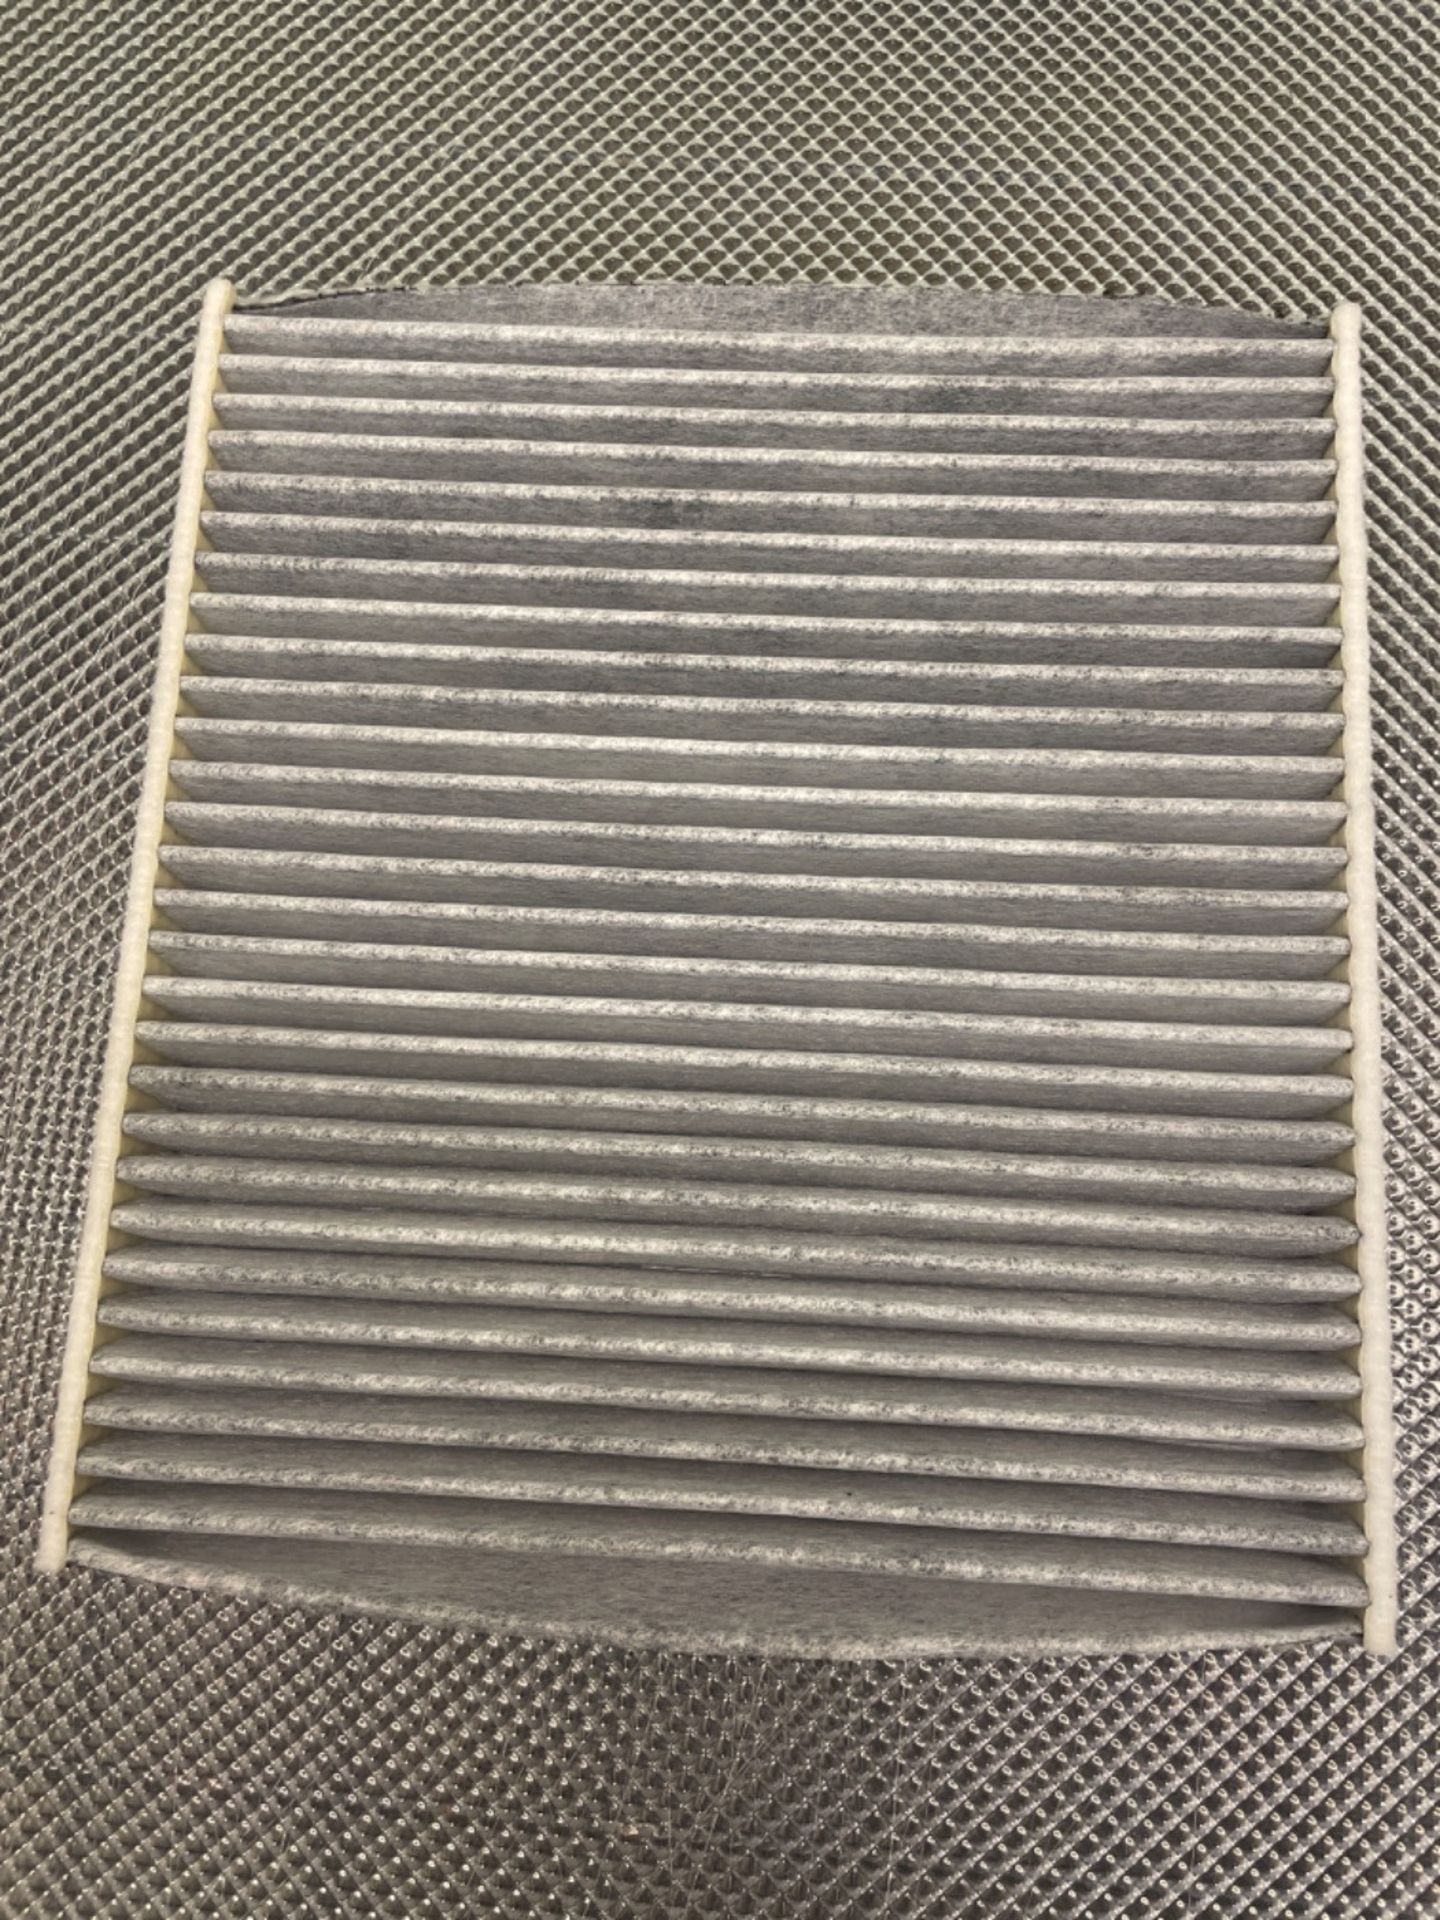 Bosch R2543 - Cabin Filter activated-carbon - Image 2 of 3